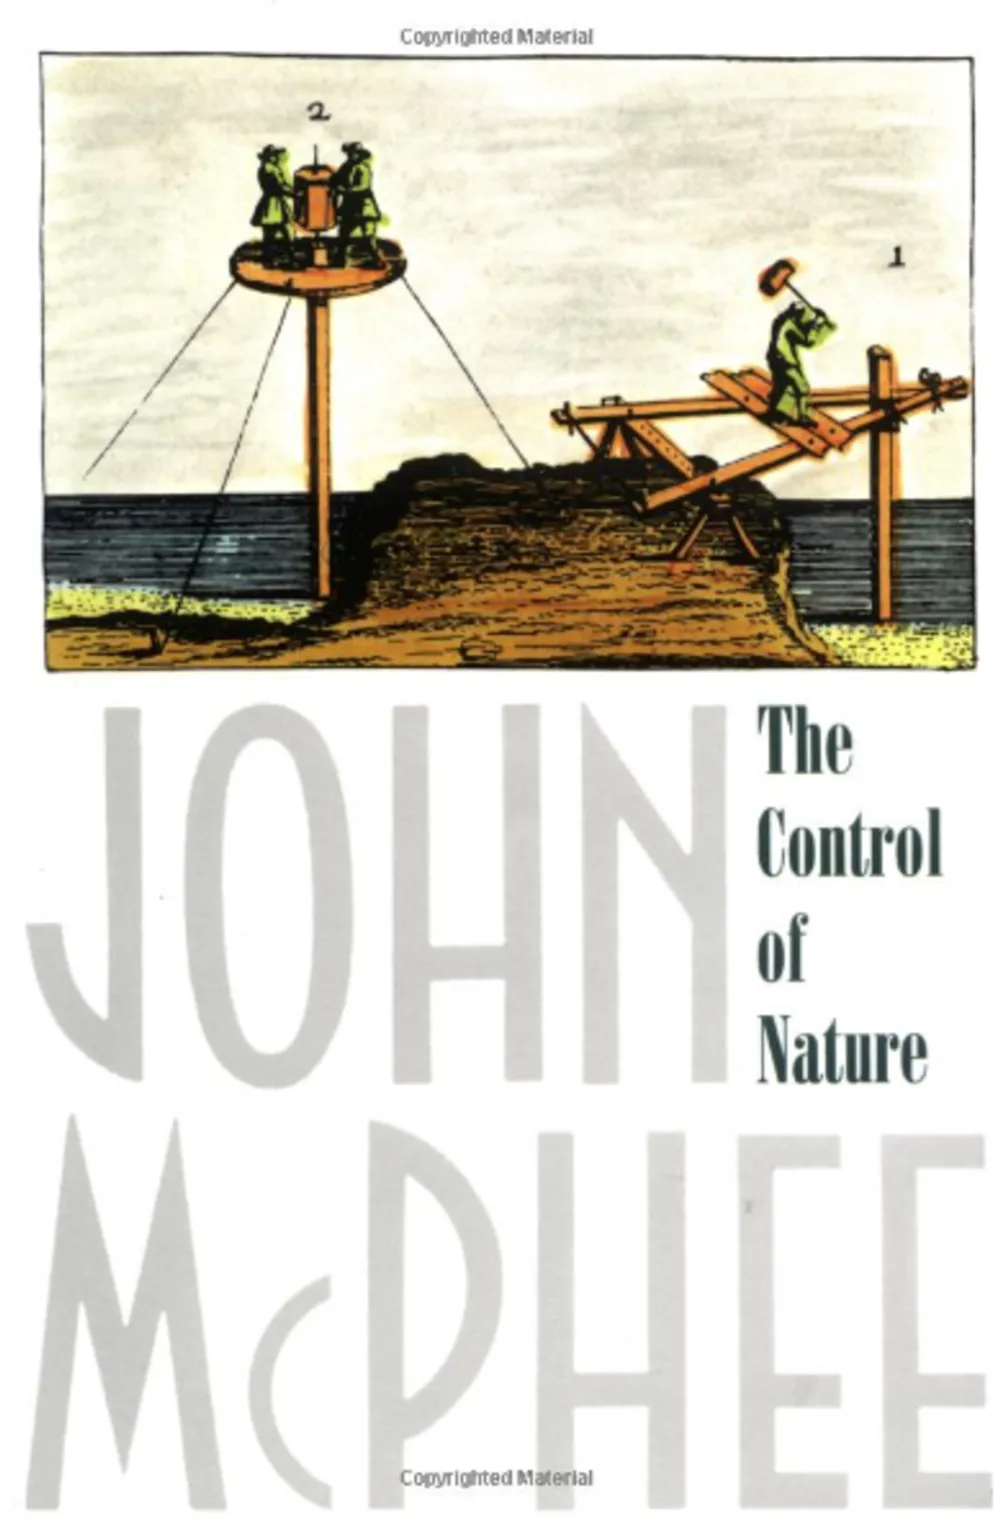 The Control of Nature, by John McPhee